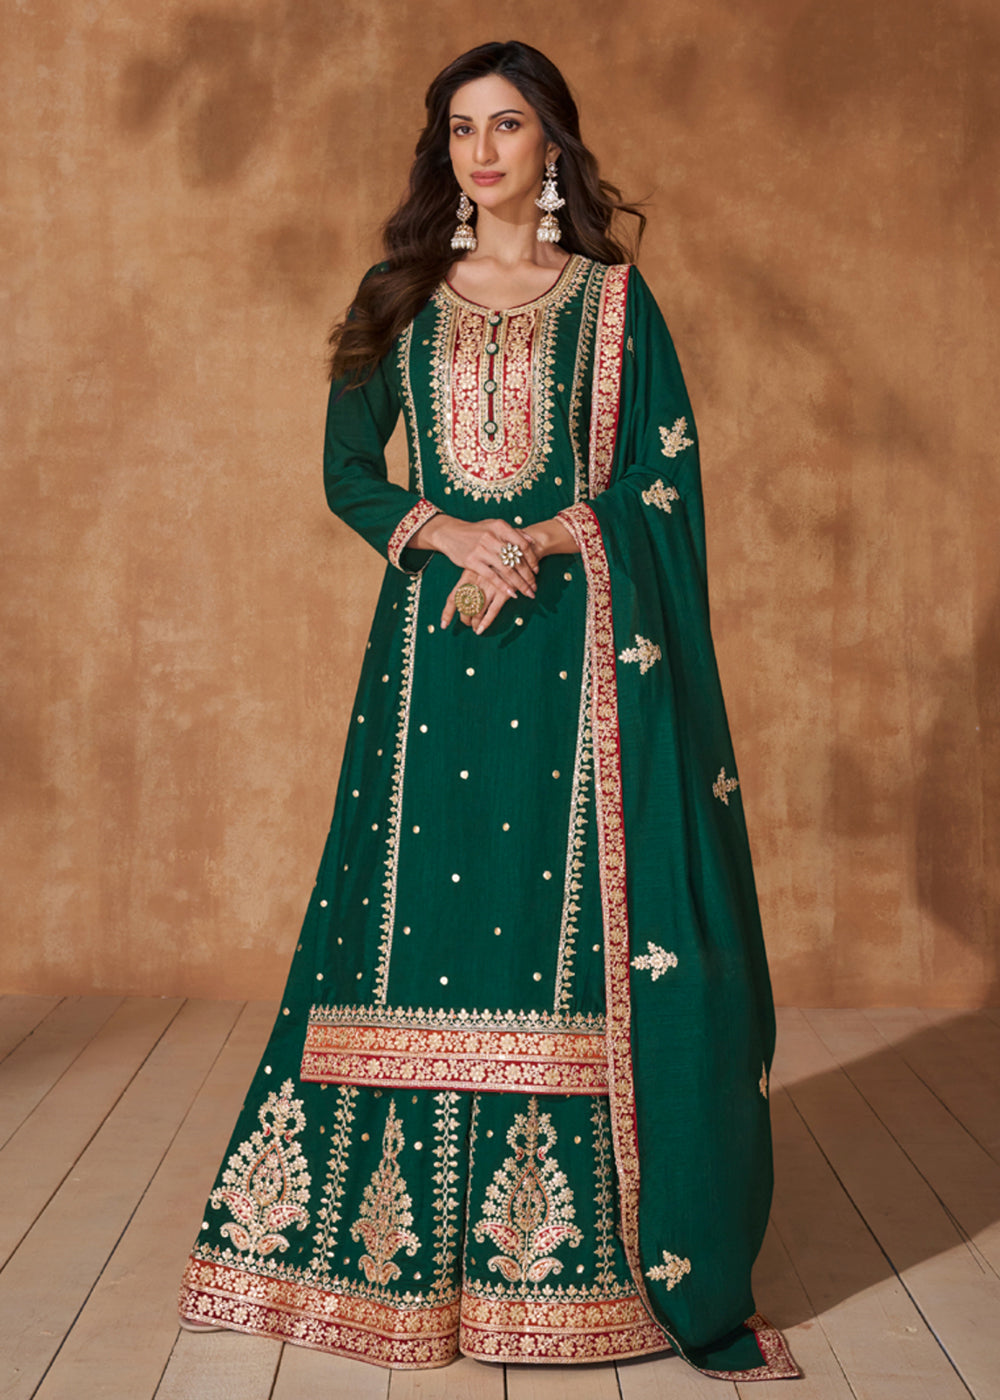 Buy Now Pine Green Premium Silk Designer Palazzo Style Suit Online in USA, UK, Canada, Germany, Australia & Worldwide at Empress Clothing. 